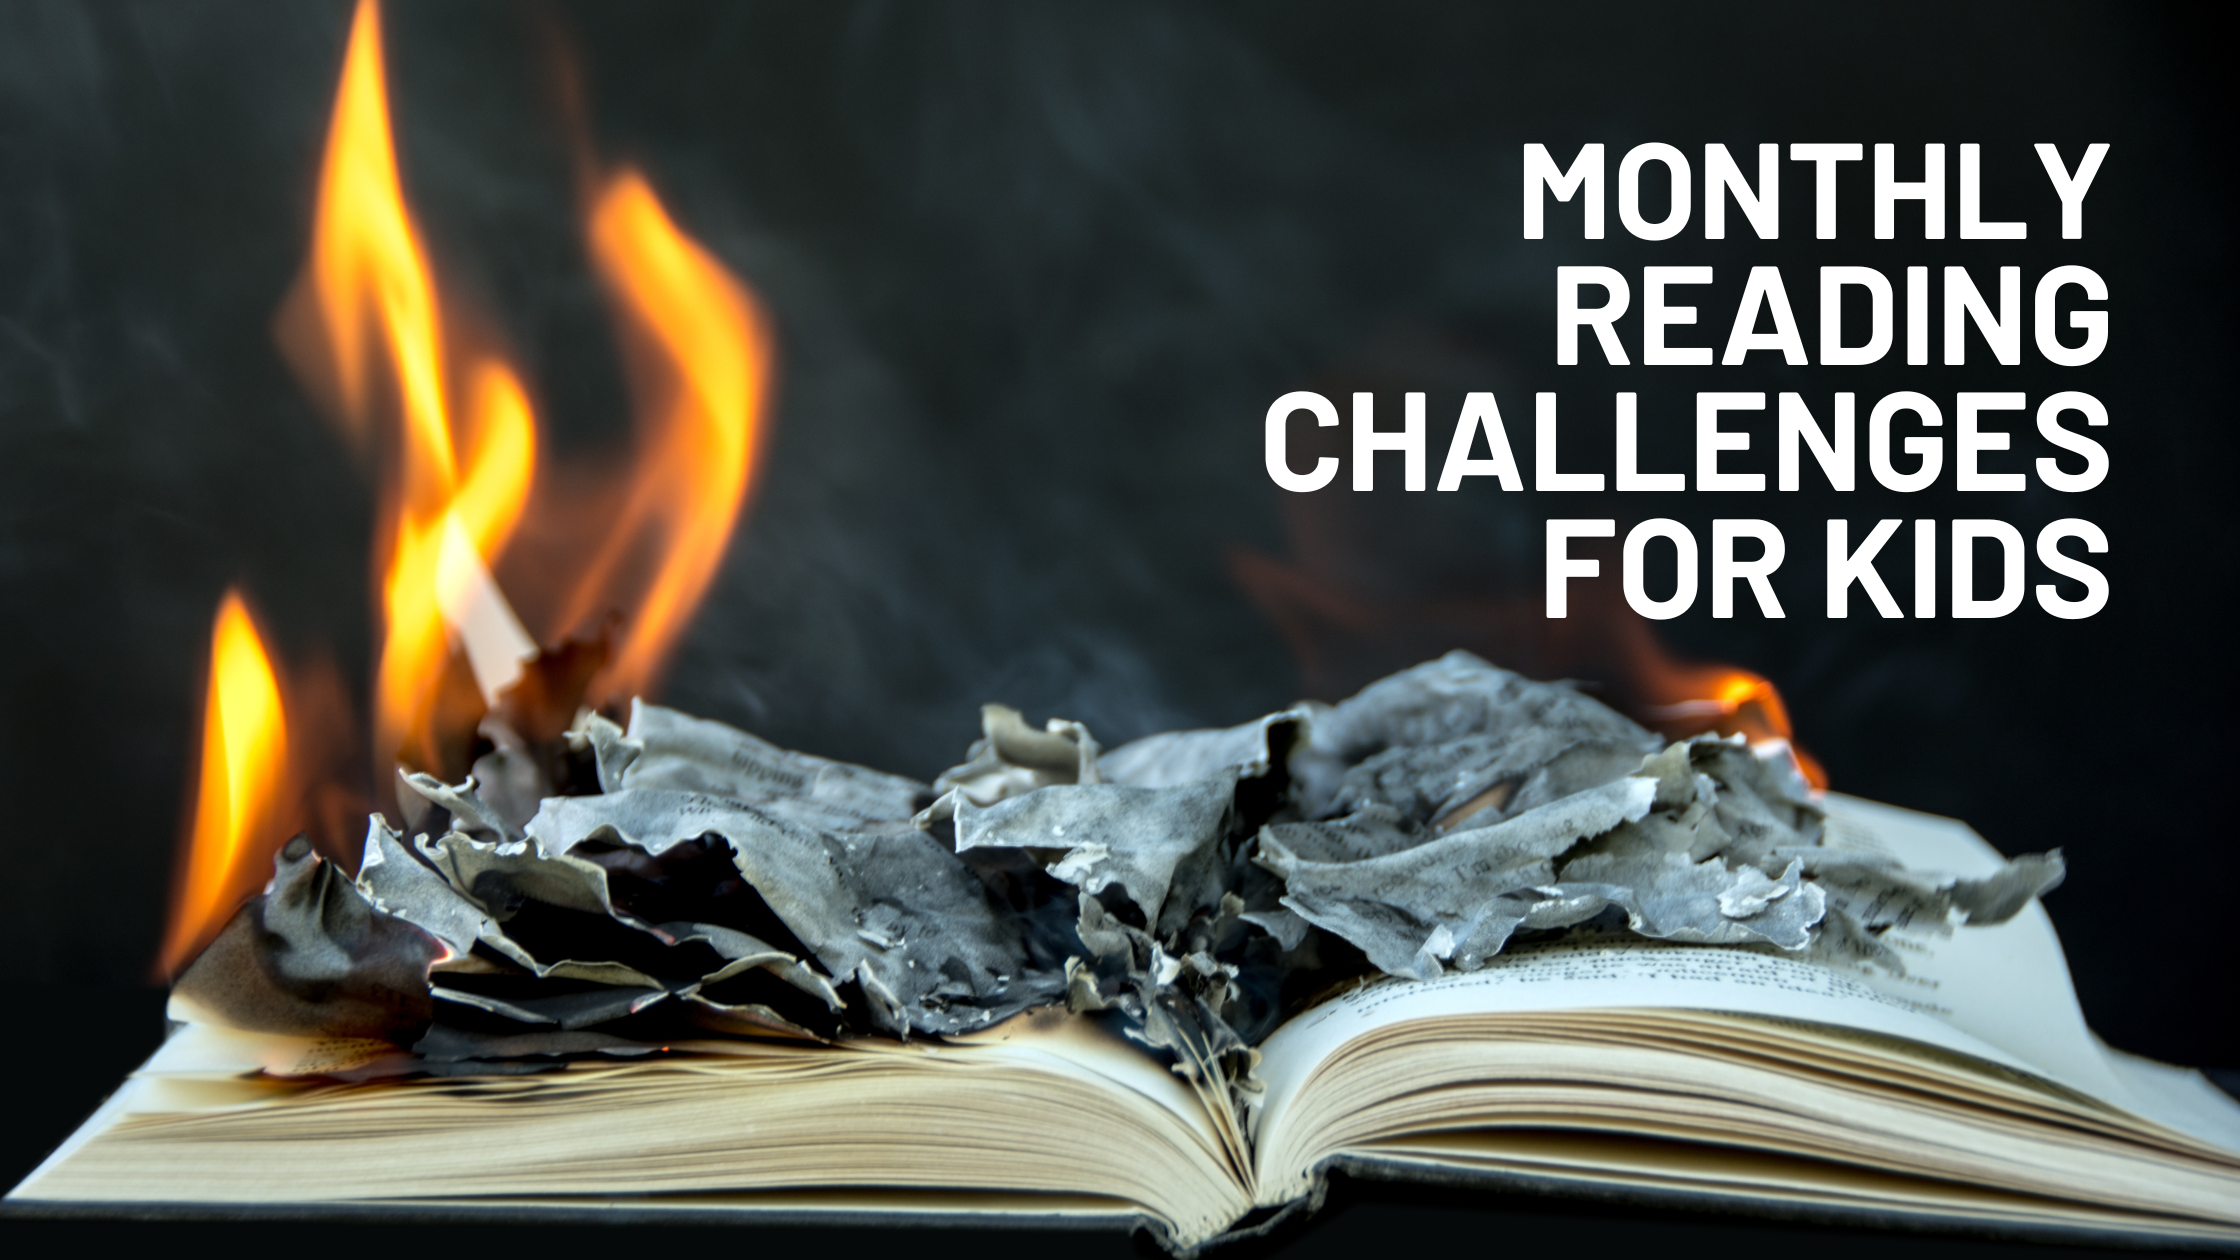 MONTHLY READING CHALLENGES FOR KIDS